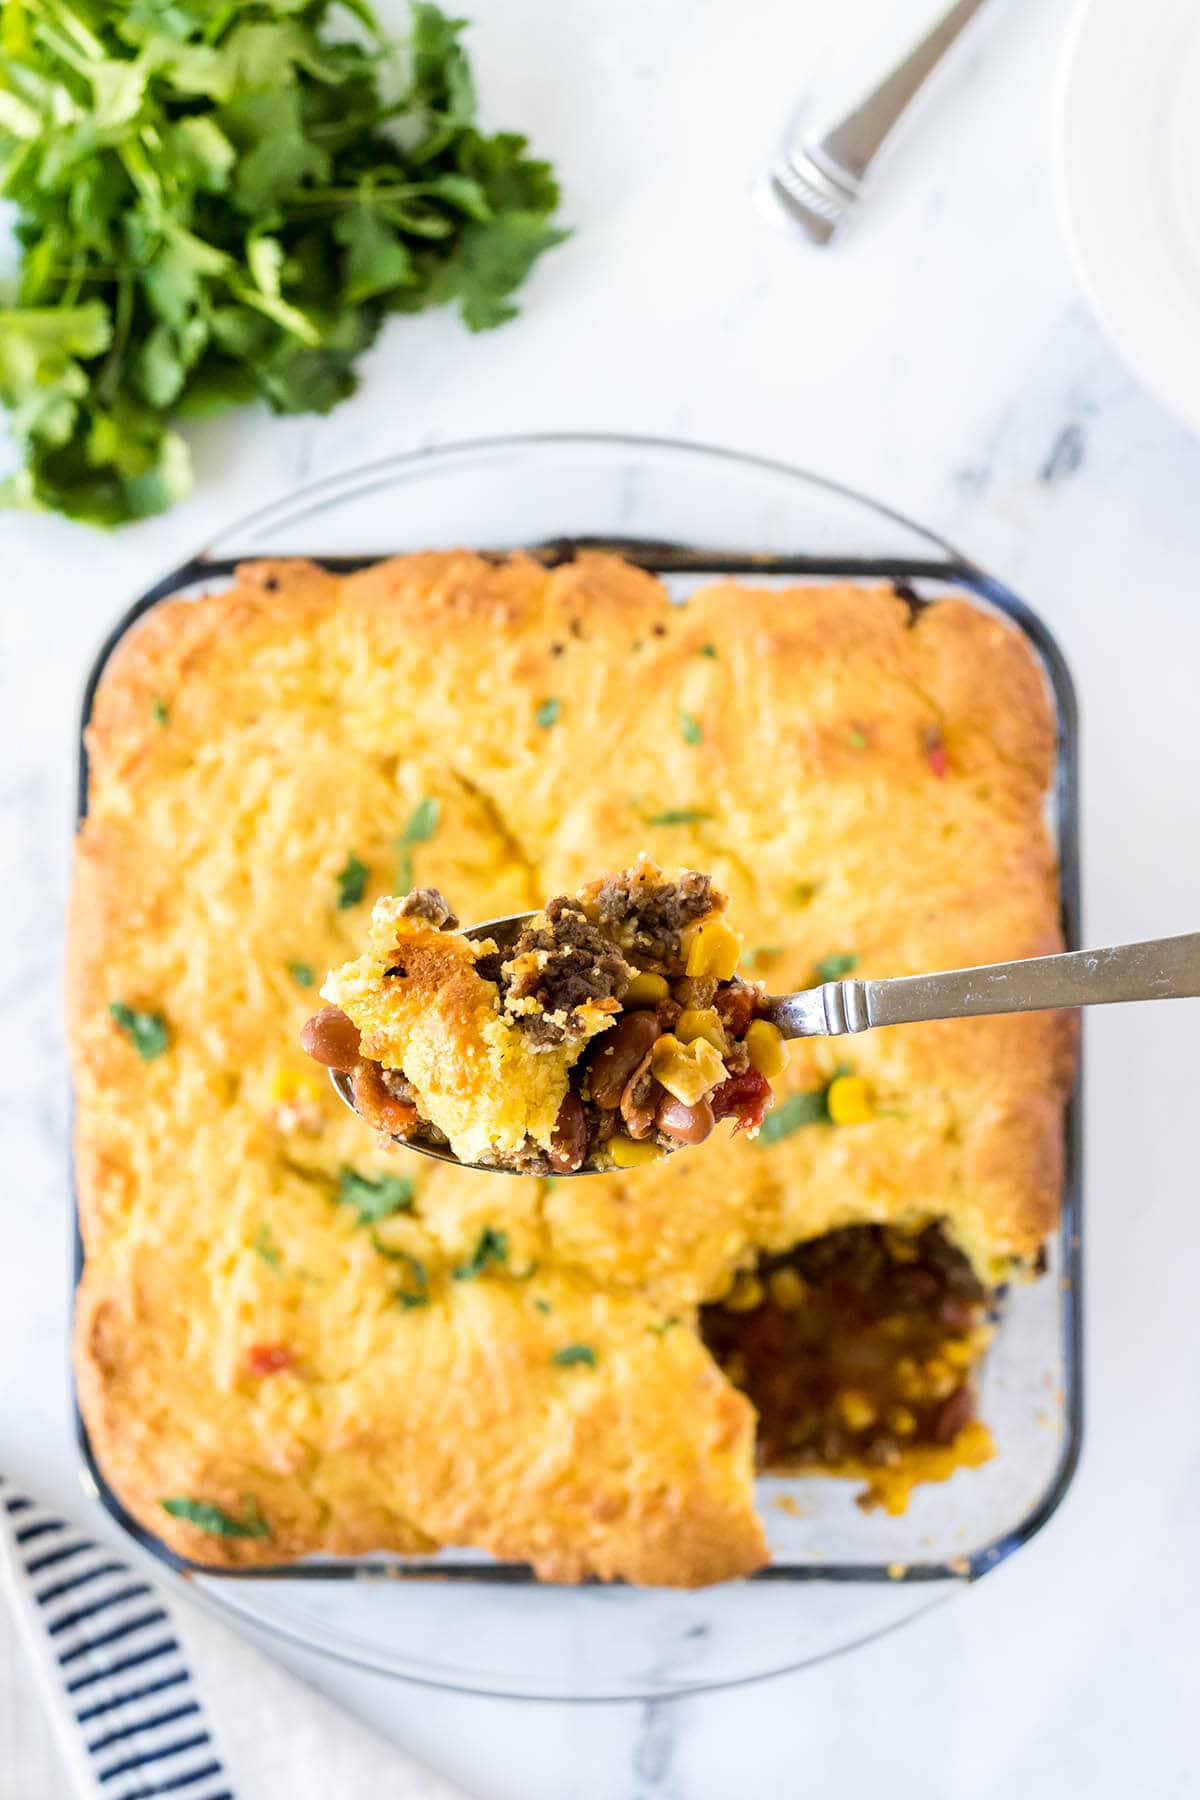 Cowboy Cornbread casserole in a baking dish with serving spoon.